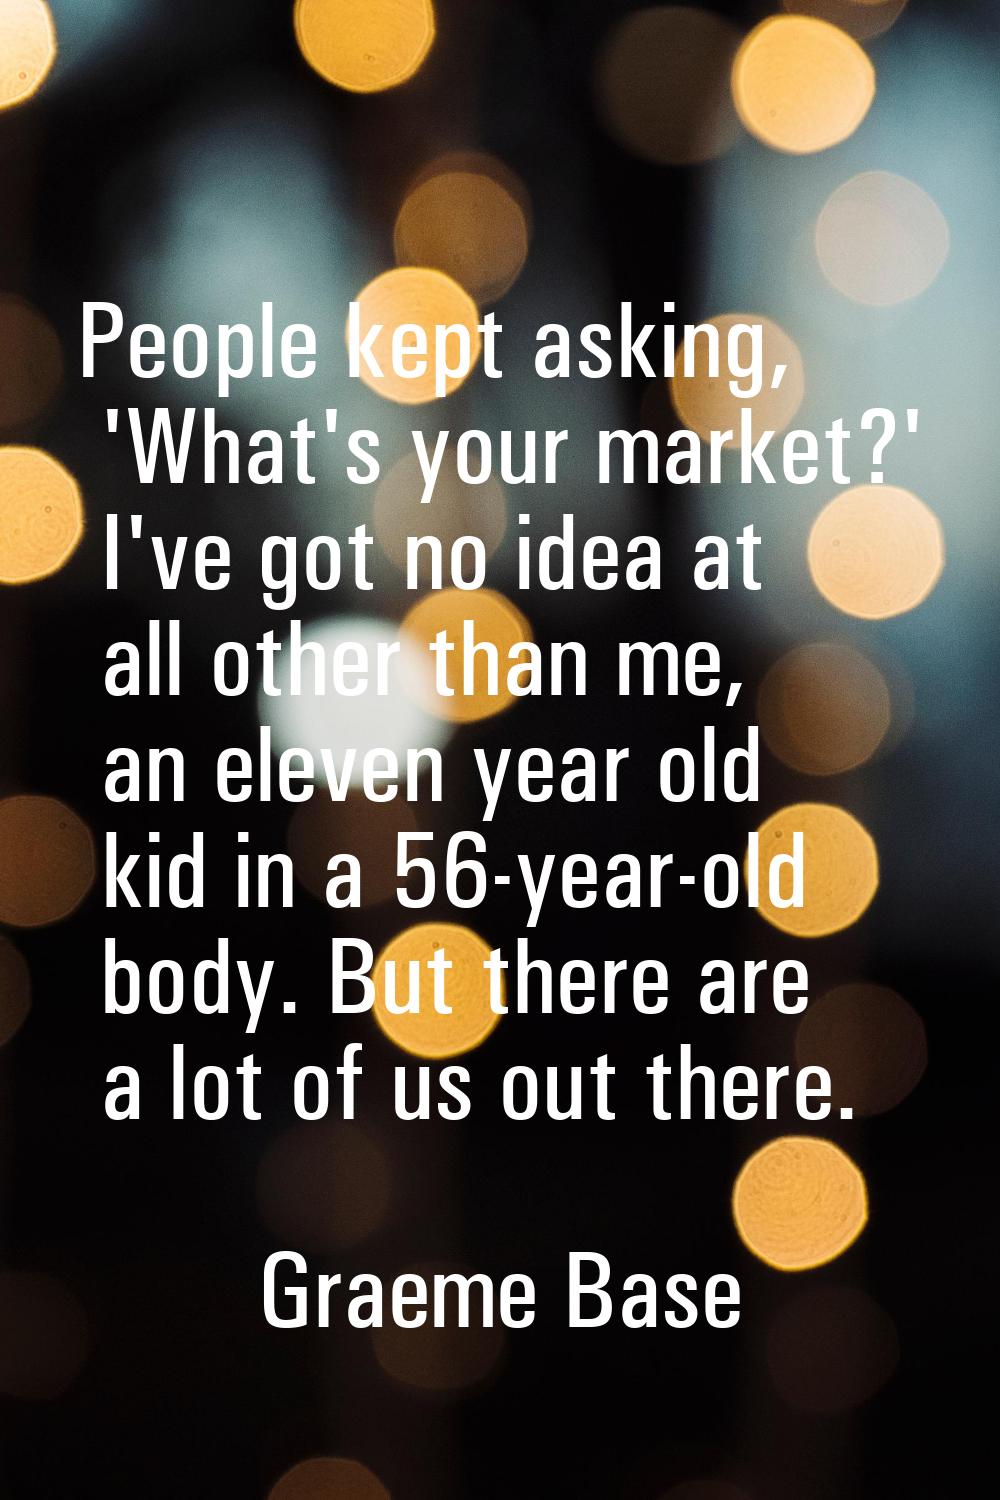 People kept asking, 'What's your market?' I've got no idea at all other than me, an eleven year old